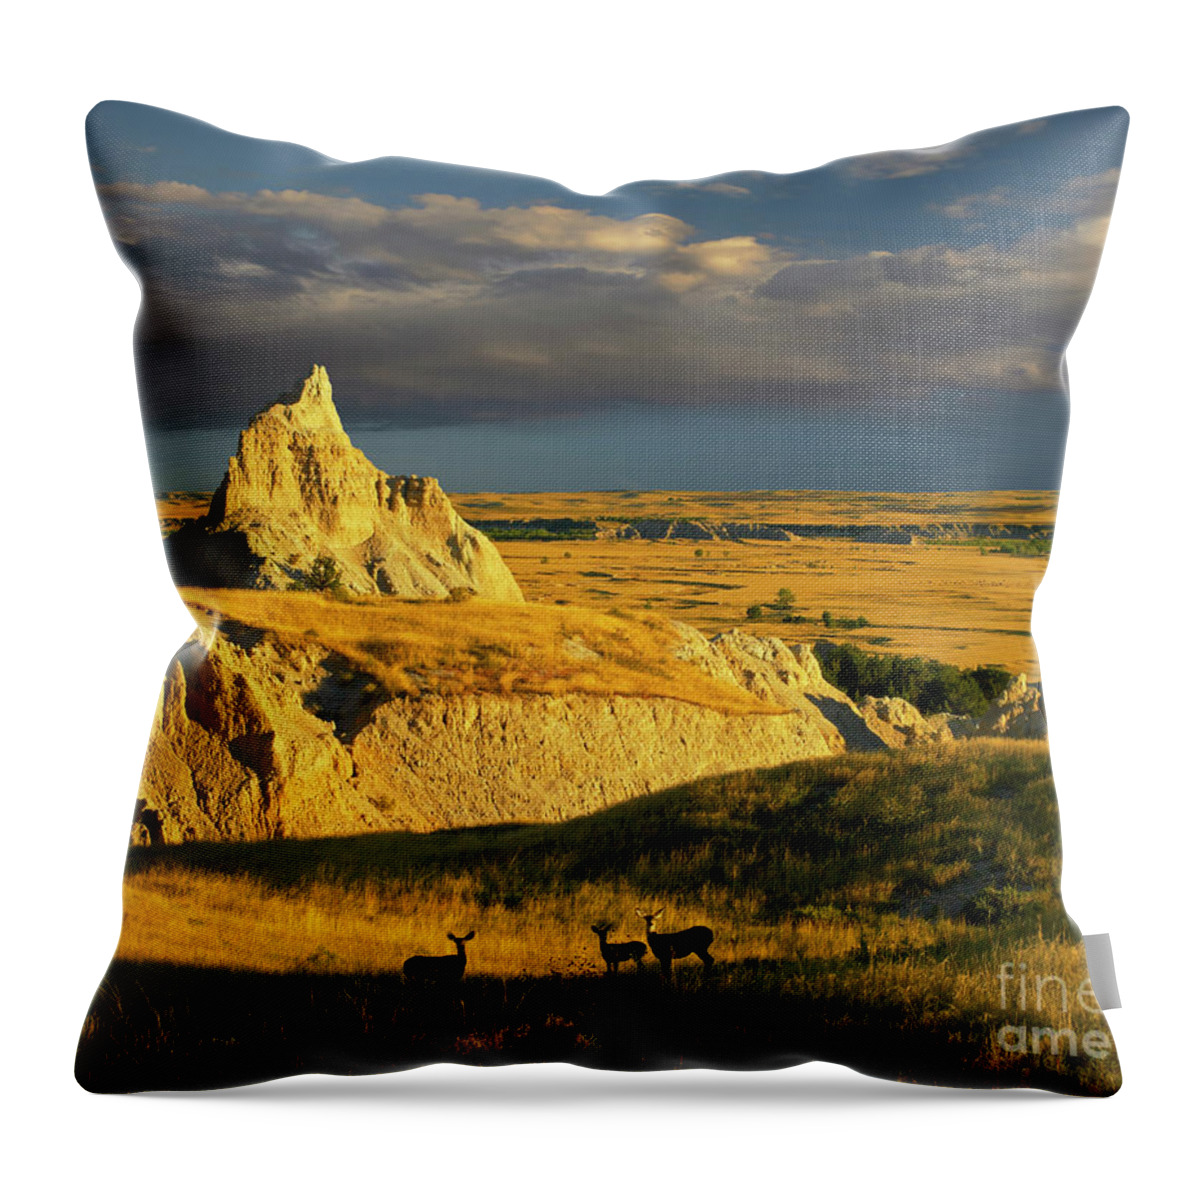 00175613 Throw Pillow featuring the photograph Badlands Mule Deer by Tim Fitzharris